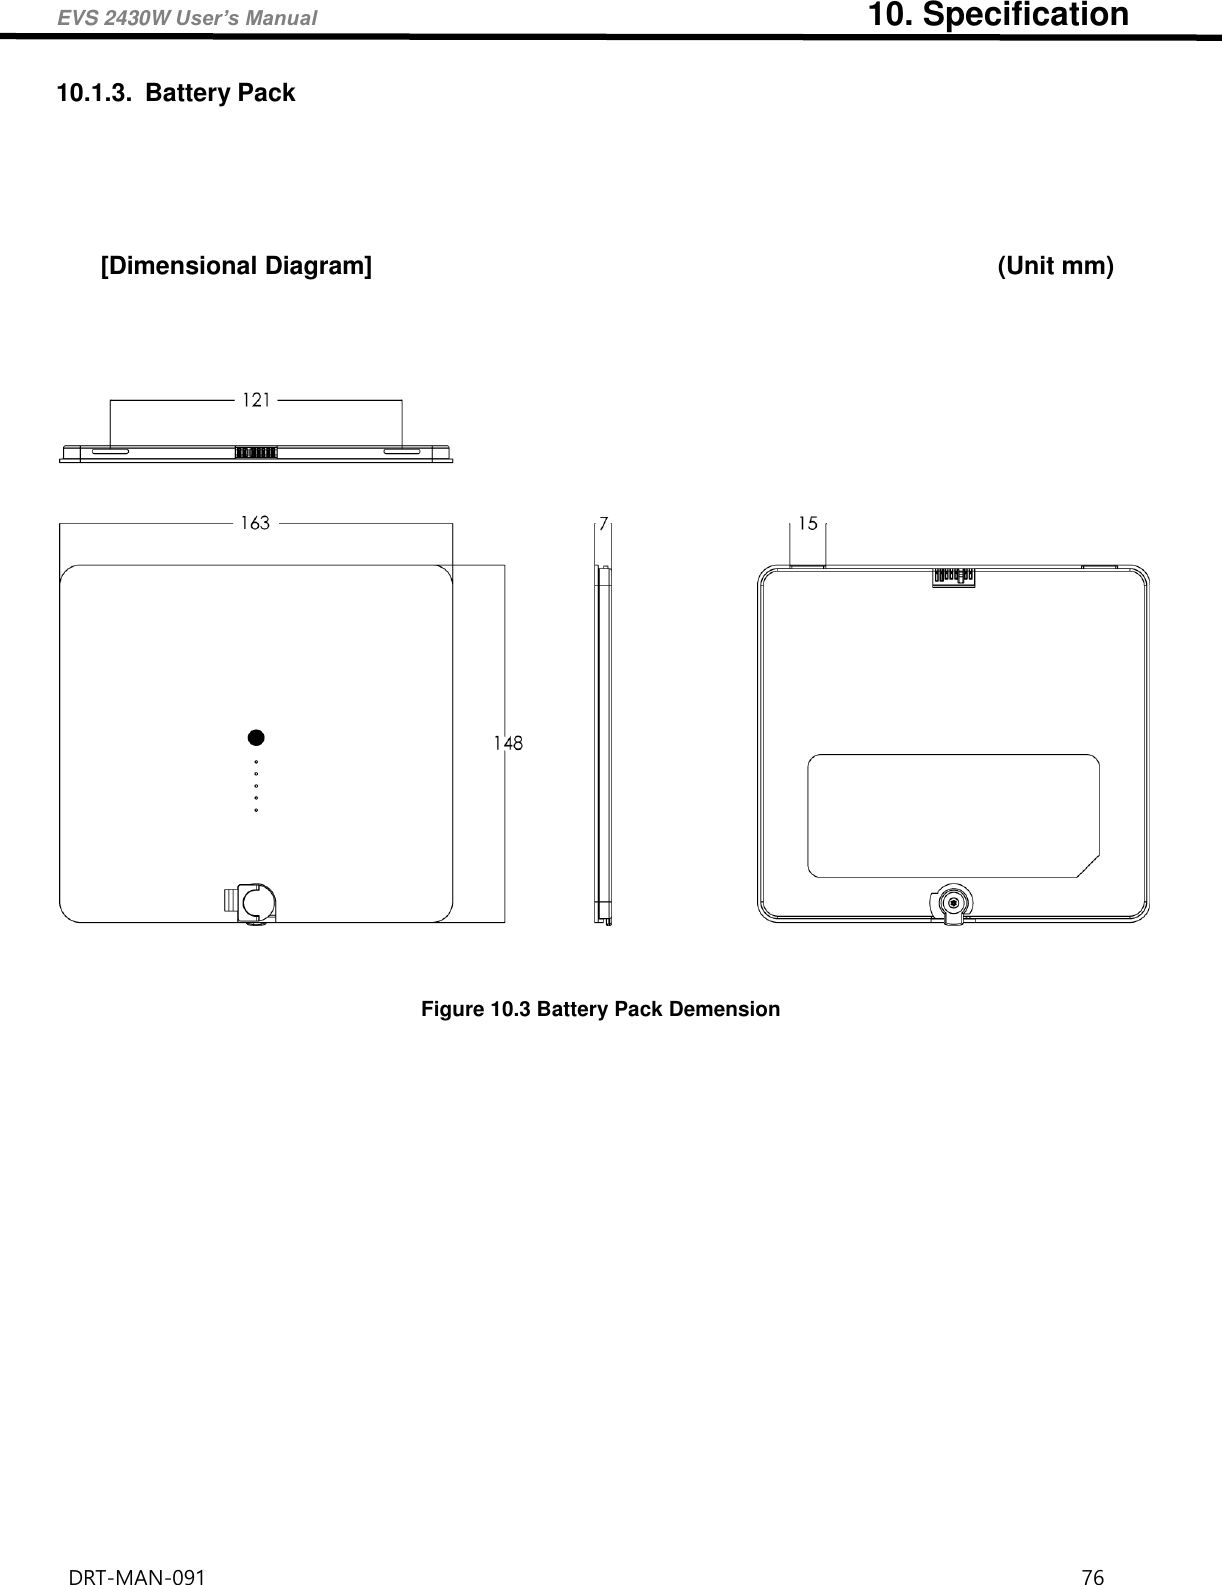 EVS 2430W User’s Manual                                                                  10. Specification DRT-MAN-091                                                                                    76   10.1.3.  Battery Pack      [Dimensional Diagram]                                                                           (Unit mm)         Figure 10.3 Battery Pack Demension     